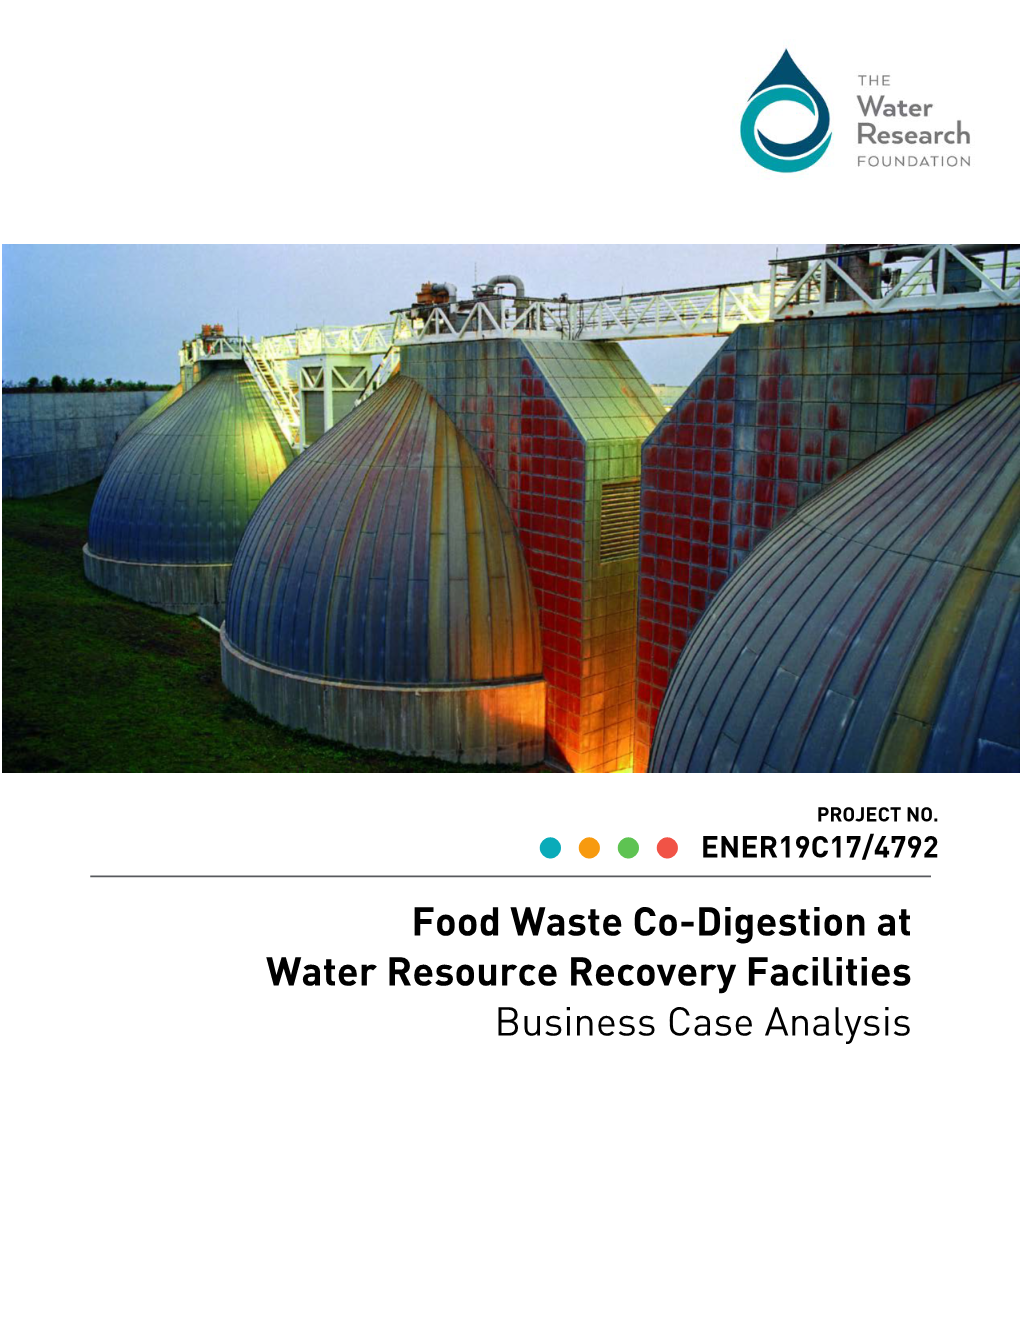 Food Waste Co-Digestion at Water Resource Recovery Facilities Business Case Analysis